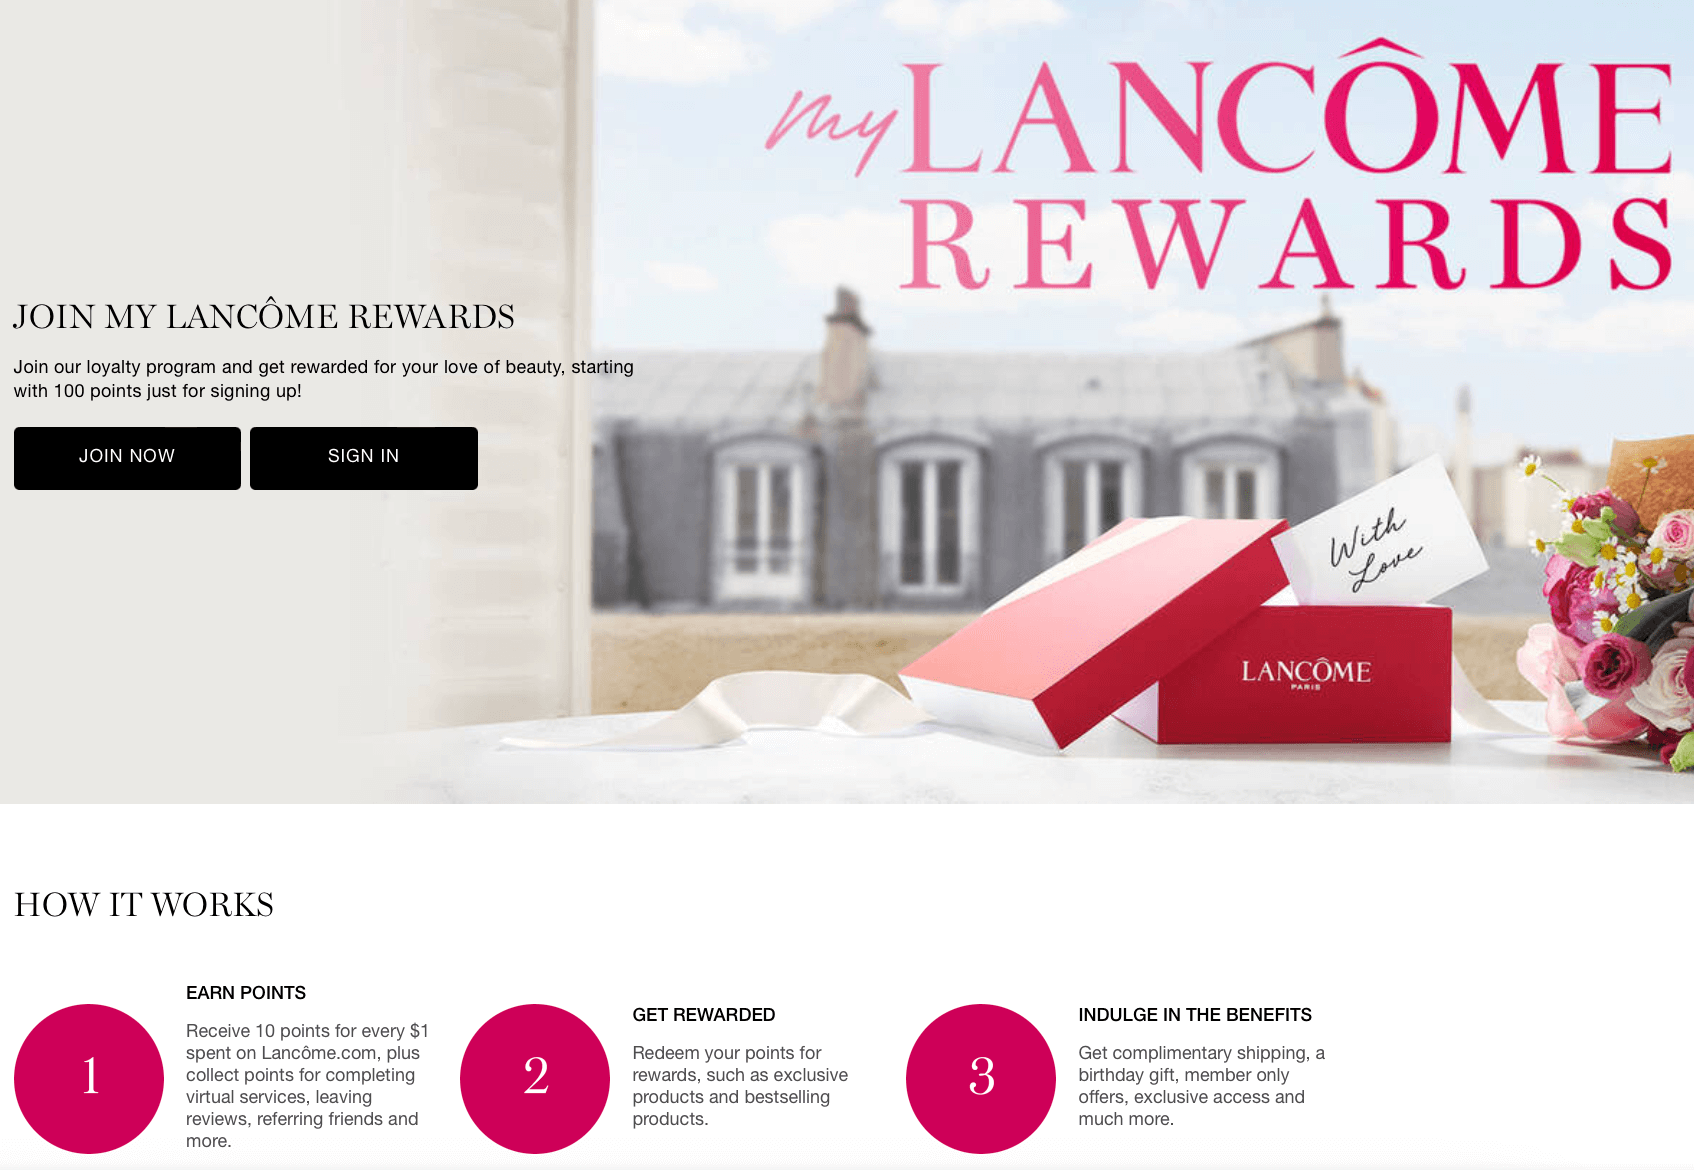 Lancome_frequent_buyer_program_email_example